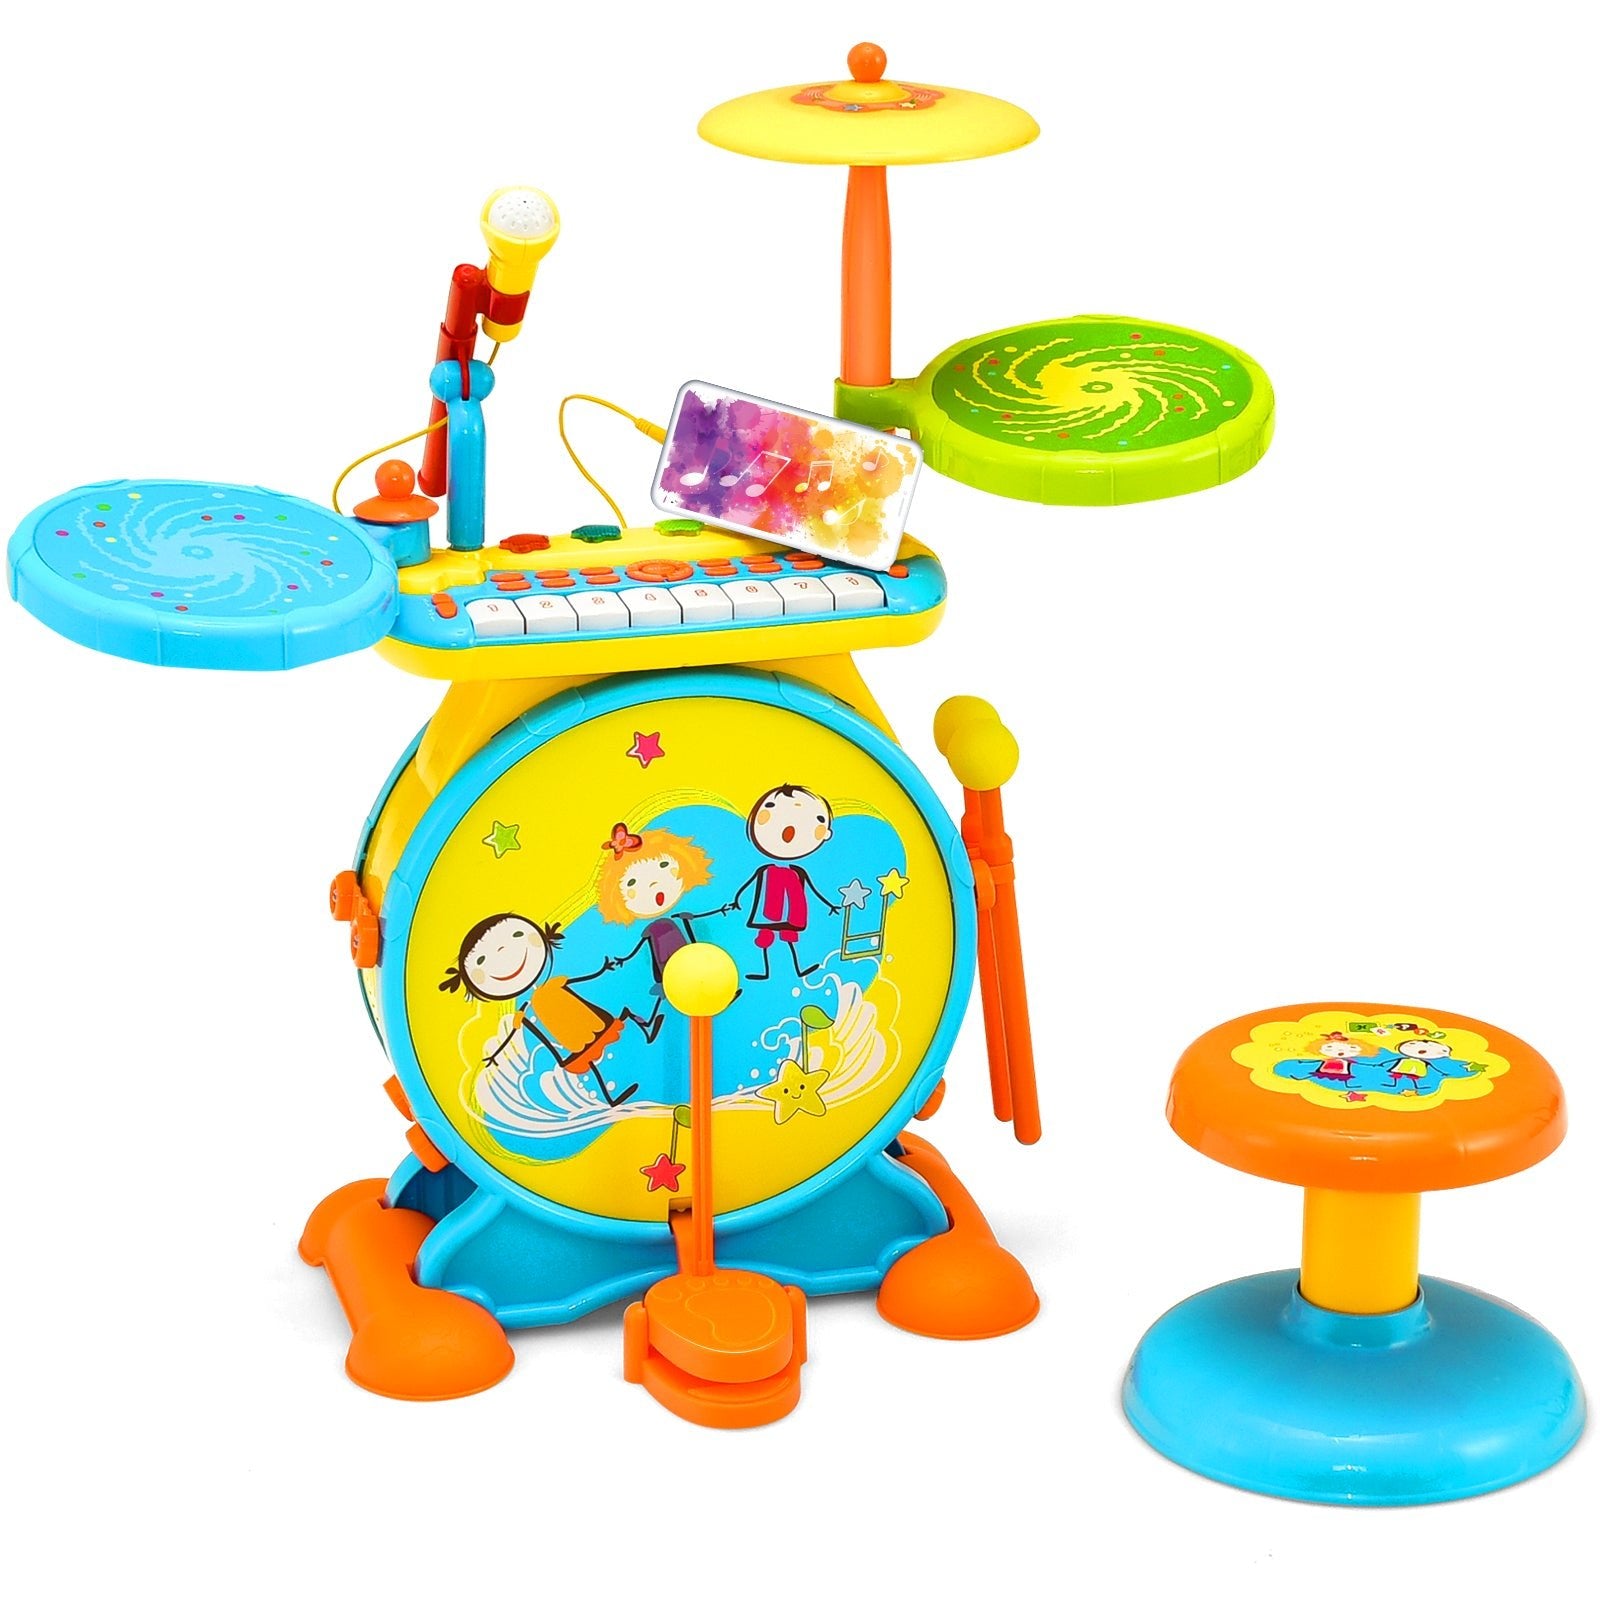 2-in-1 Kids Electronic Drum Kit Toy - Blue with Keyboard & Microphone